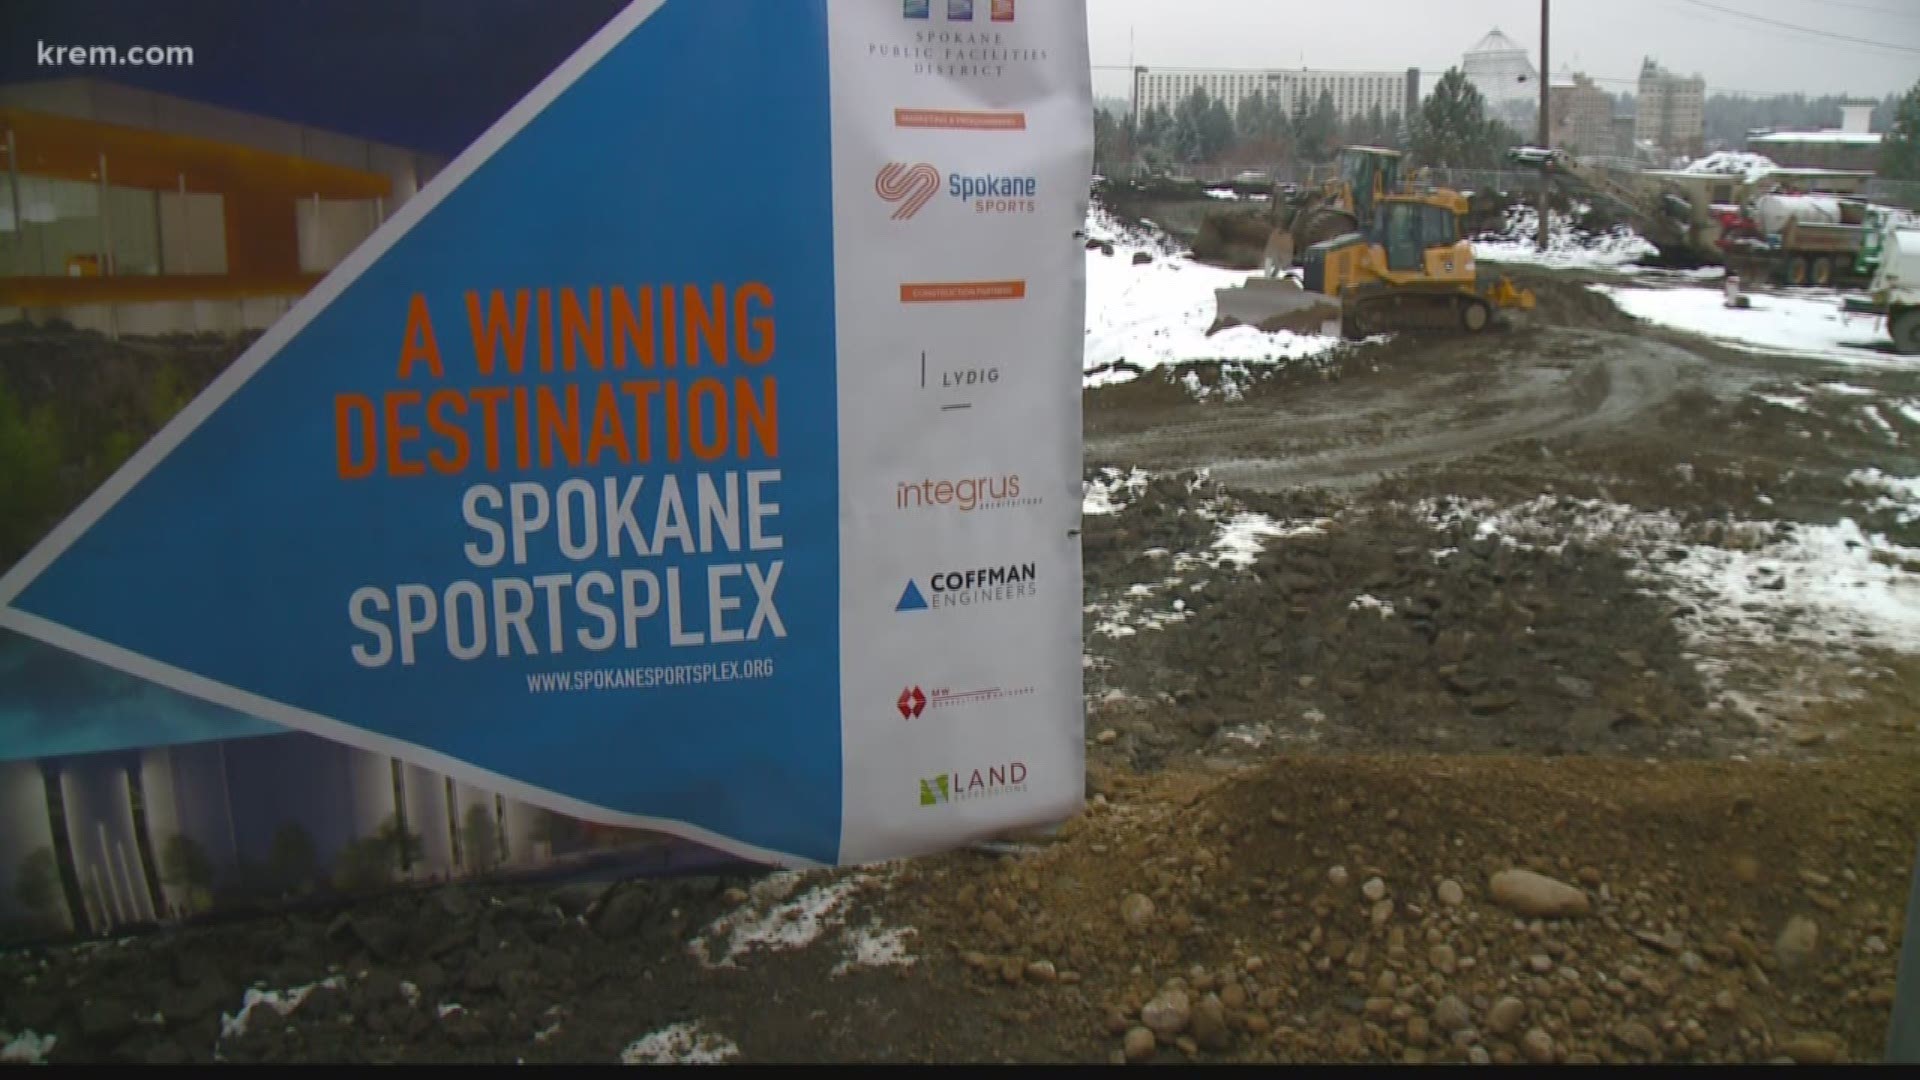 The Sportsplex will be able to host at least 16 sports and seat 4,000 people. It will be located on the north bank of the Spokane River.